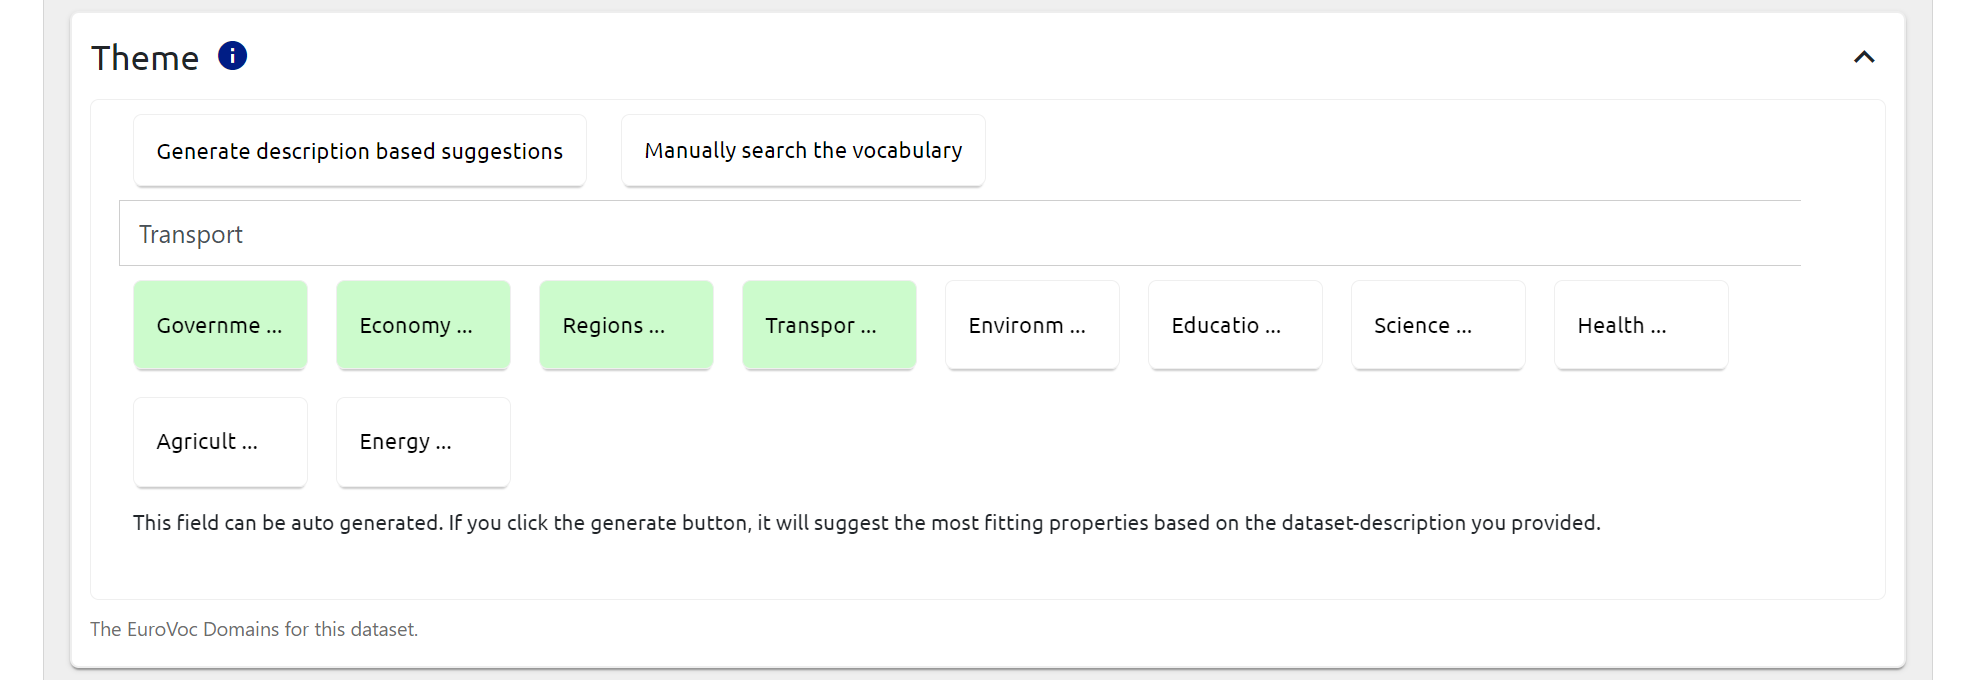 Annif example for the search field